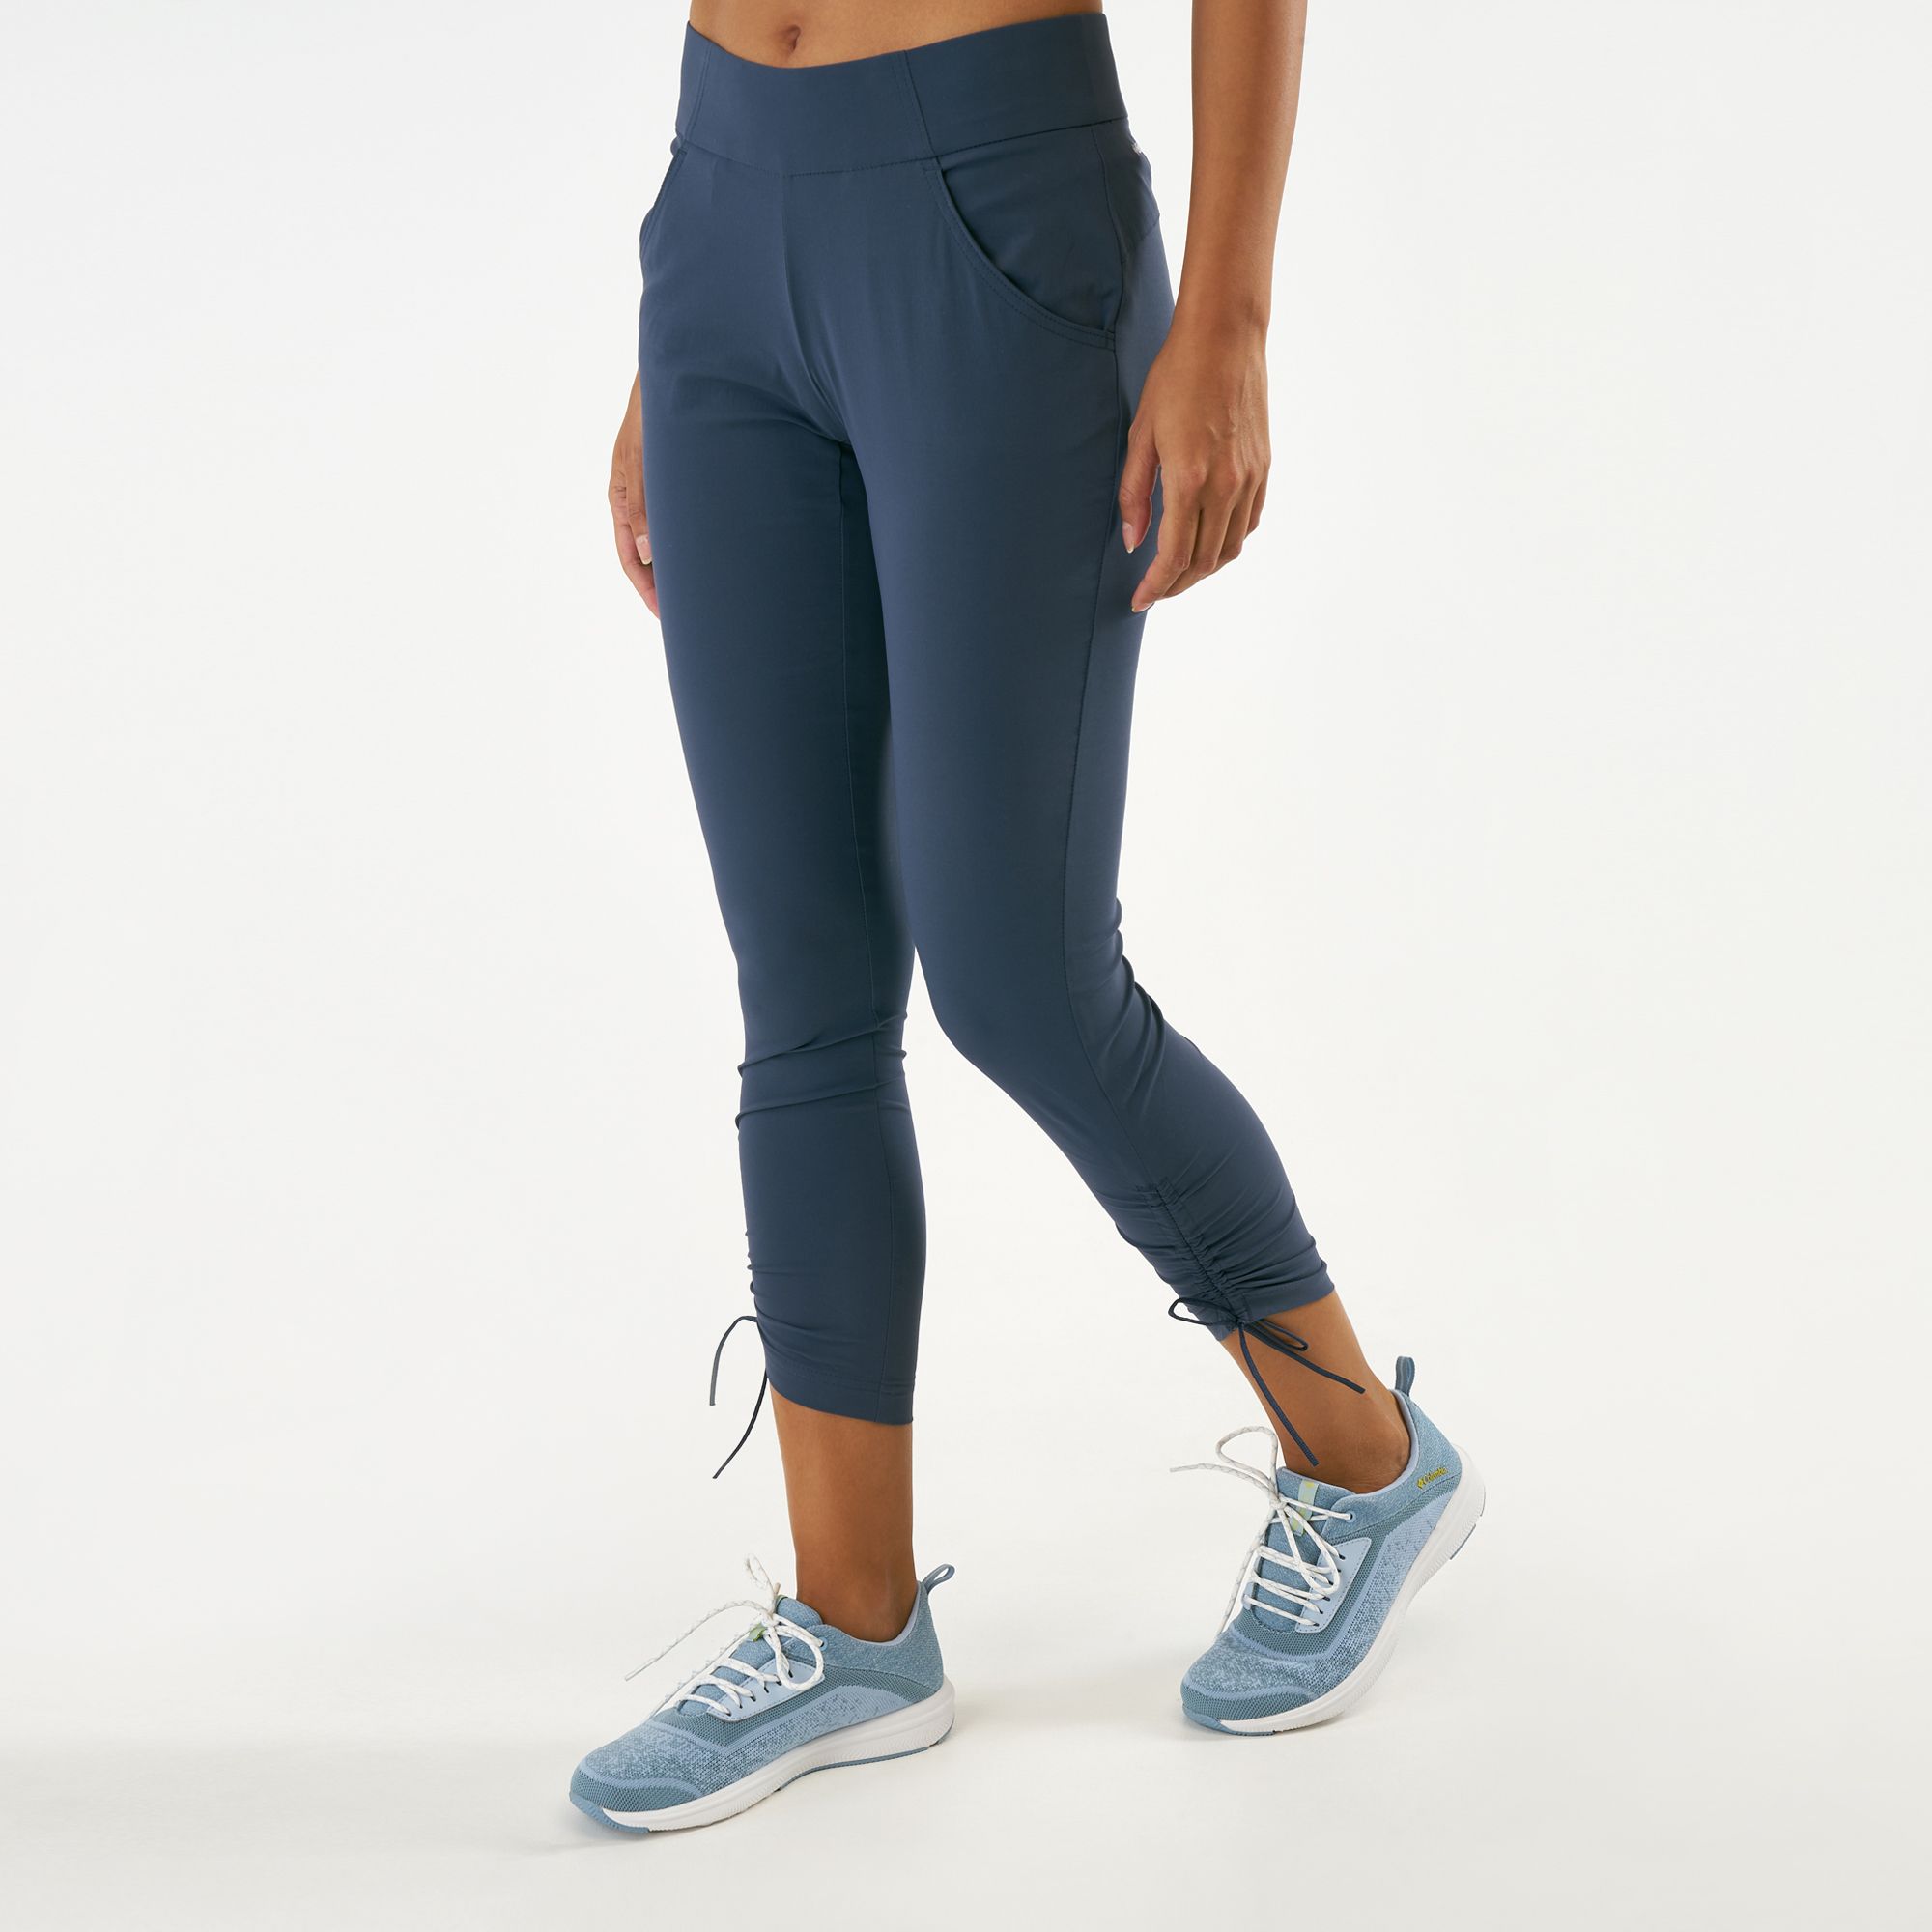 Buy Columbia Women's Anytime Casual™ Ankle Pants Online in Dubai, UAE | SSS